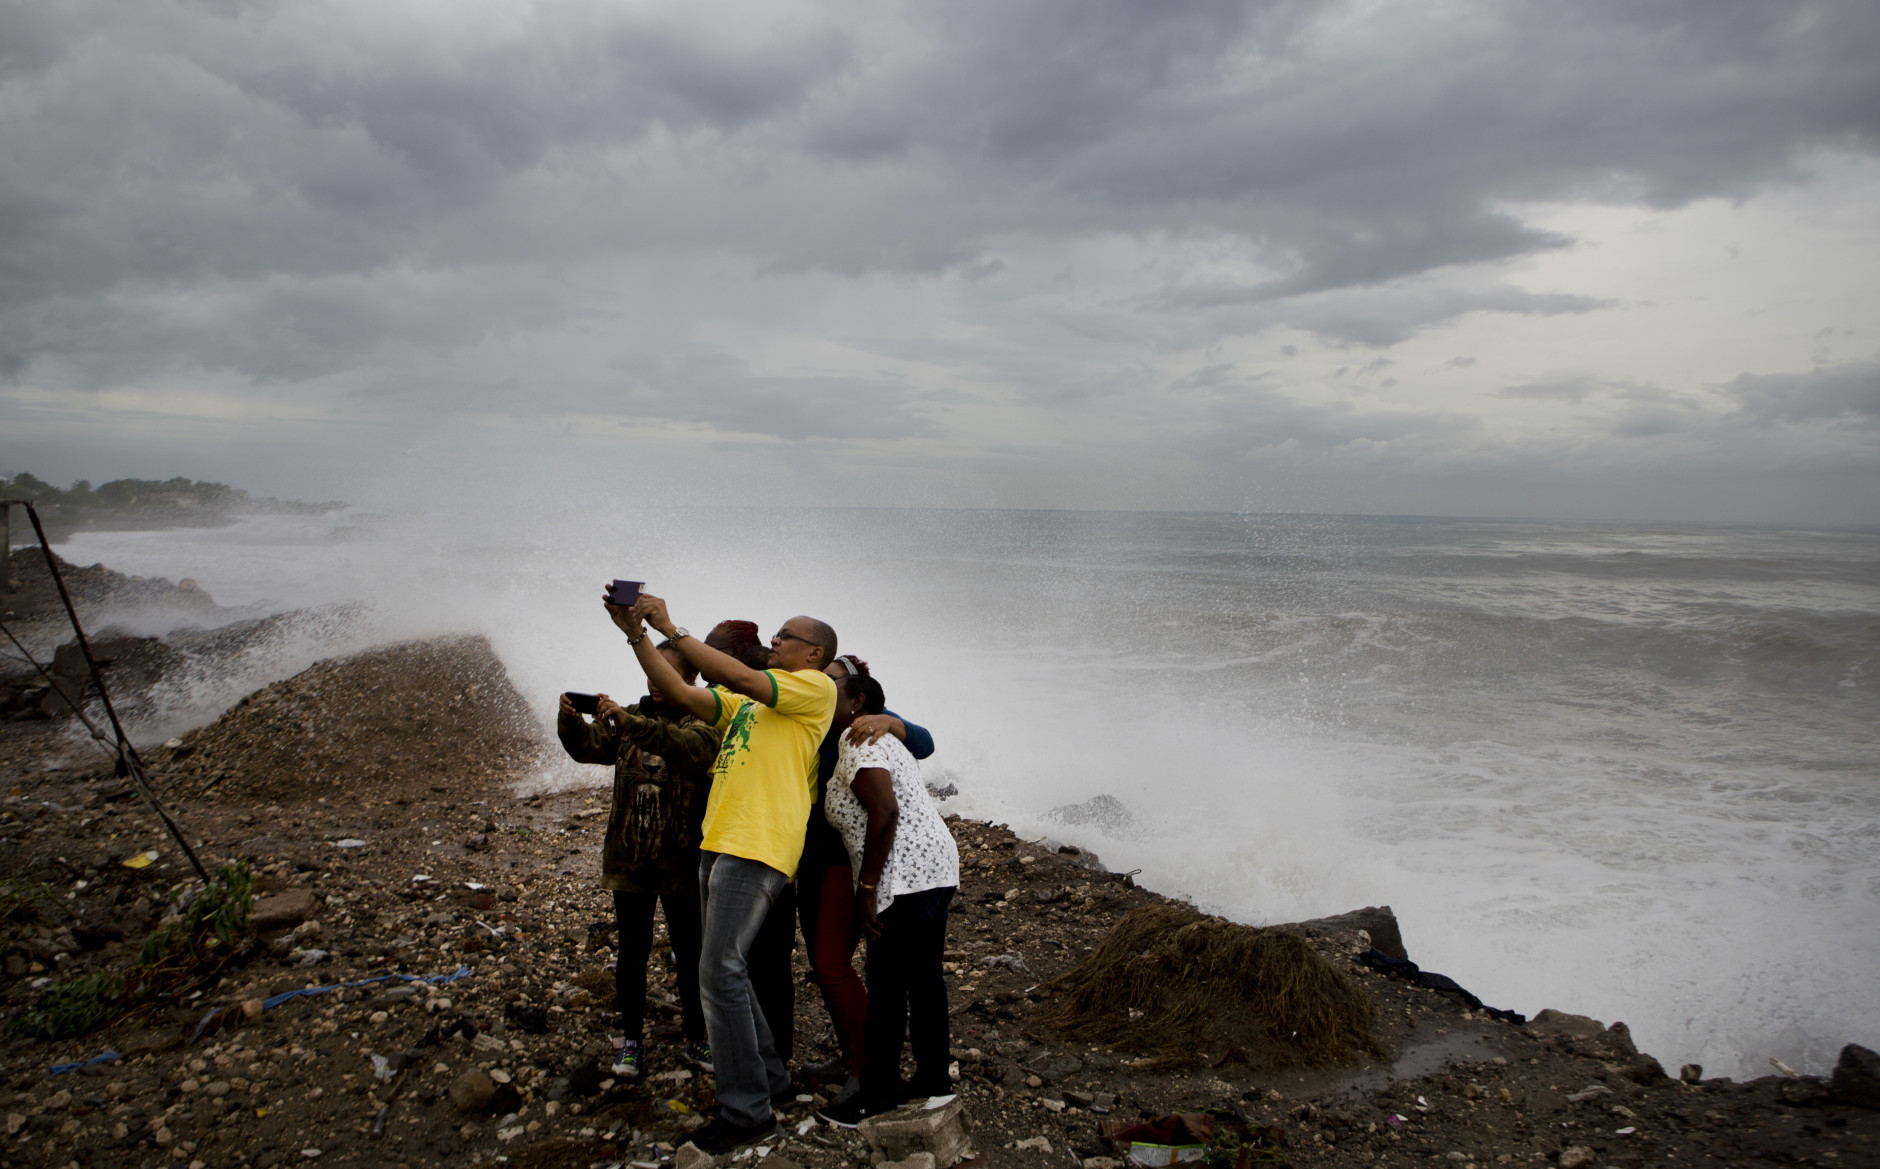 People take a photo as they stand on the coast watching the surf produced by Hurricane Matthew, on the outskirts of Kingston, Jamaica, Monday, Oct. 3, 2016. A hurricane warning is in effect for Jamaica, Haiti, and the Cuban provinces of Guantanamo, Santiago de Cuba, Holguin, Granma and Las Tunas - as well as the southeastern Bahamas. (AP Photo/Eduardo Verdugo)